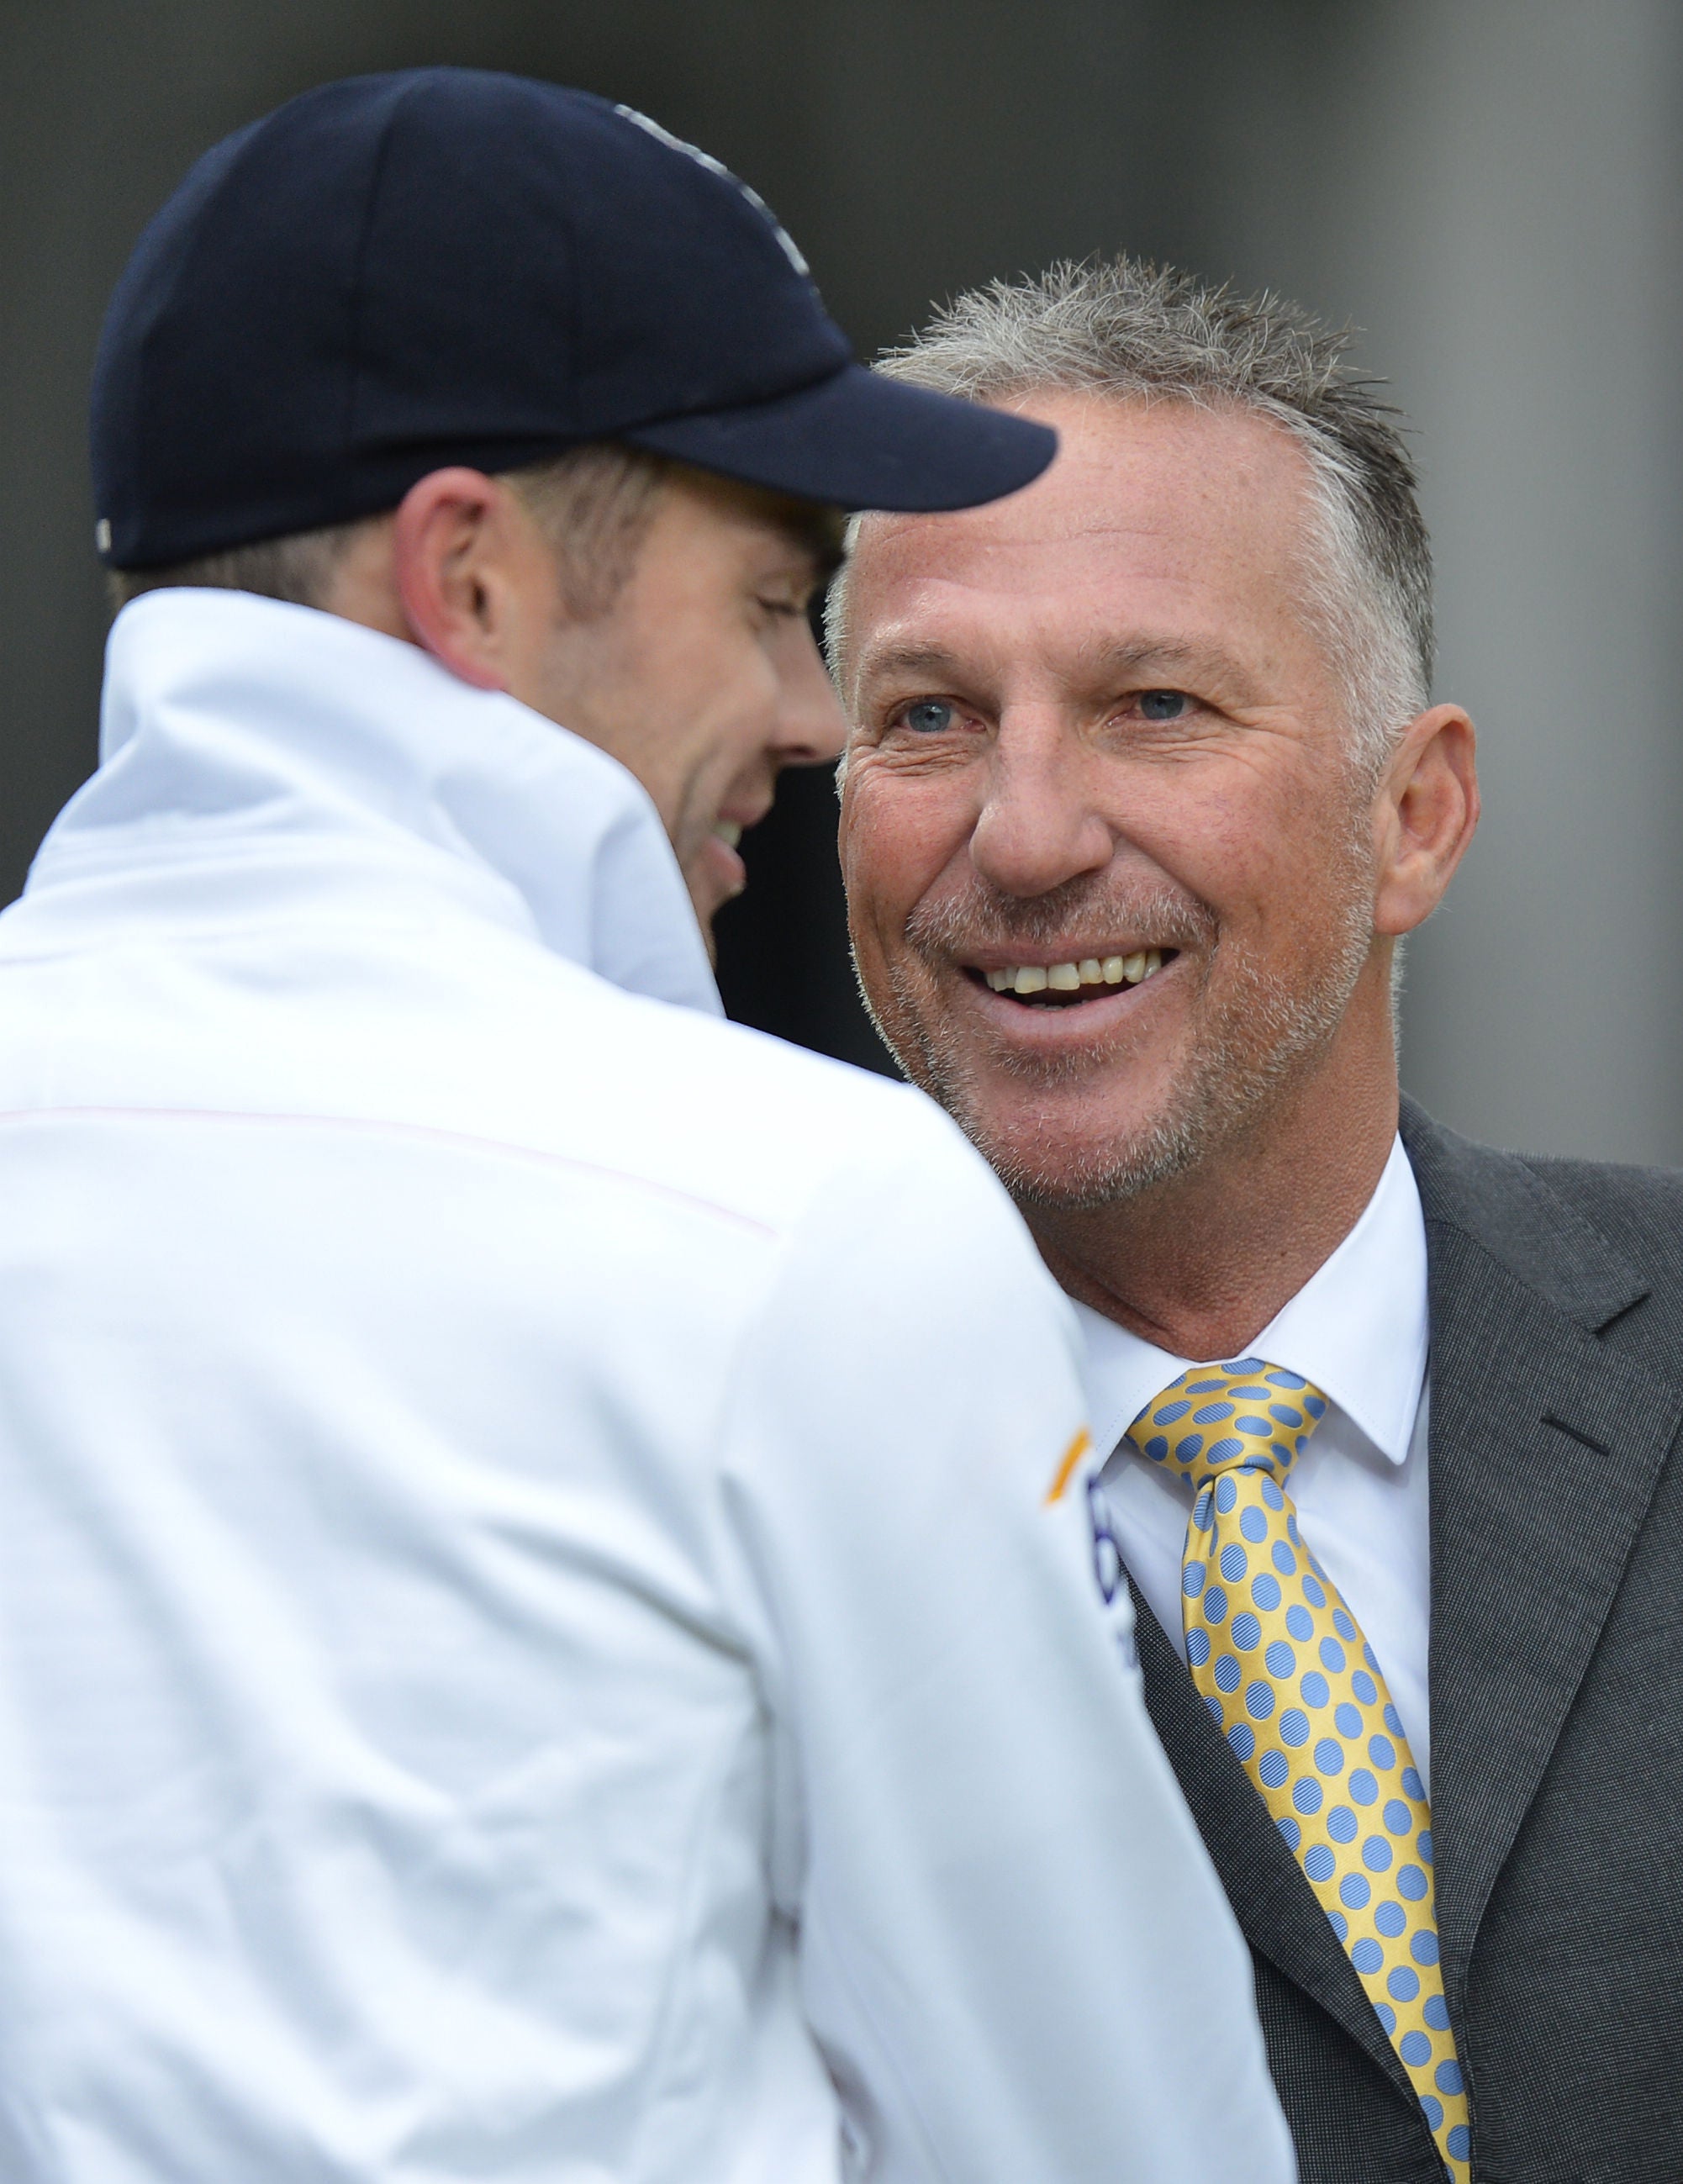 James Anderson (left) is congratulated by Ian Botham after joining him by reaching 300 Test wickets (Anthony Devlin/PA)